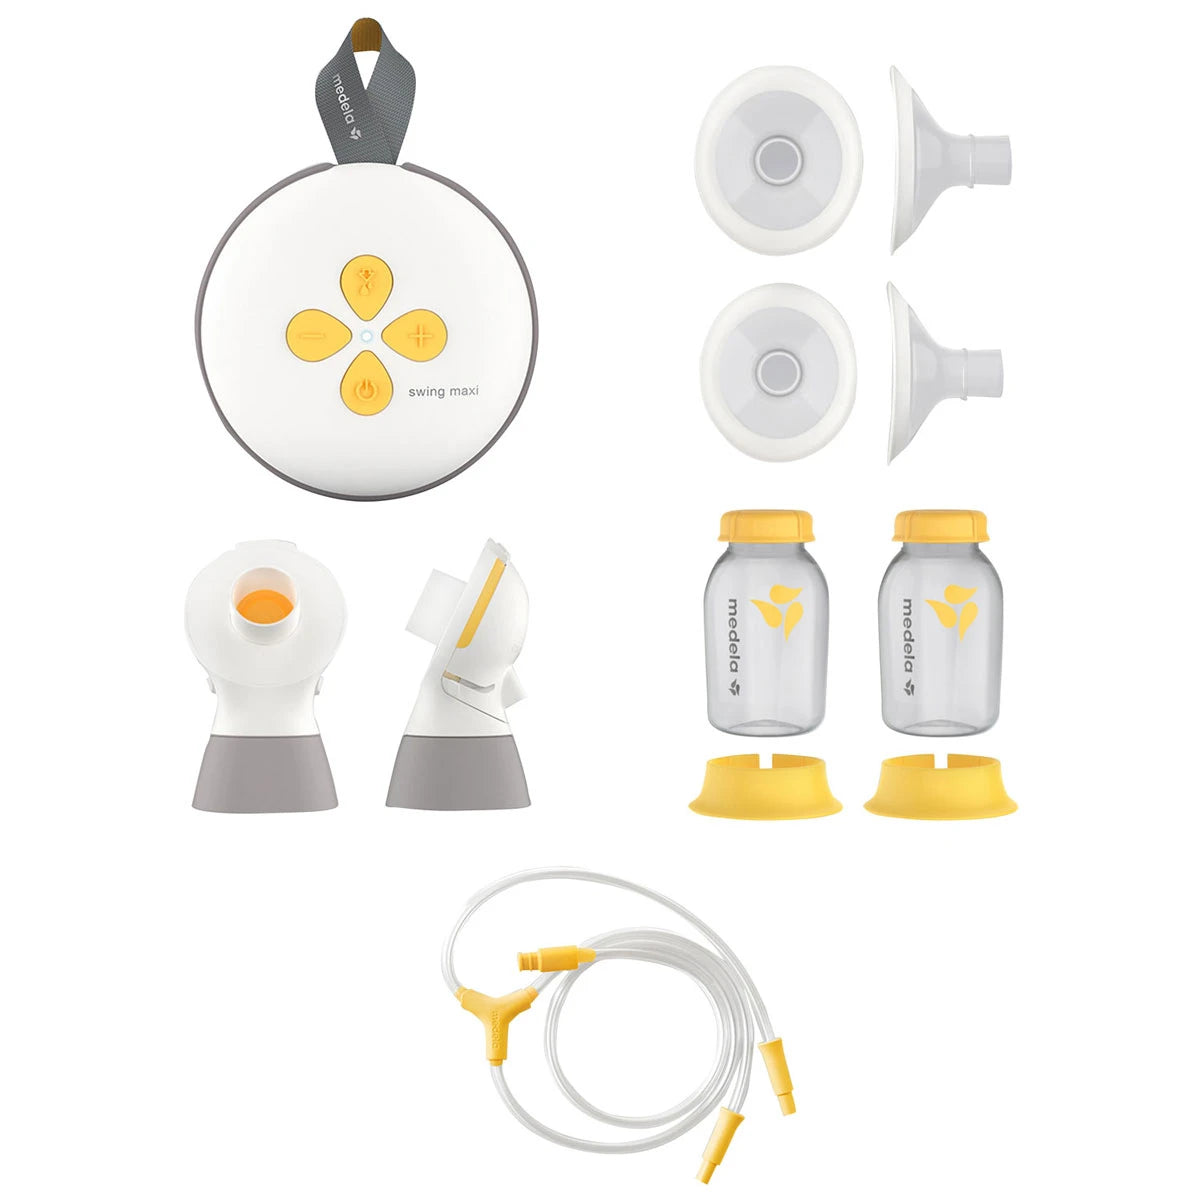 Buy Medela Swing Maxi™ Double Electric Breast Pump x1 · USA